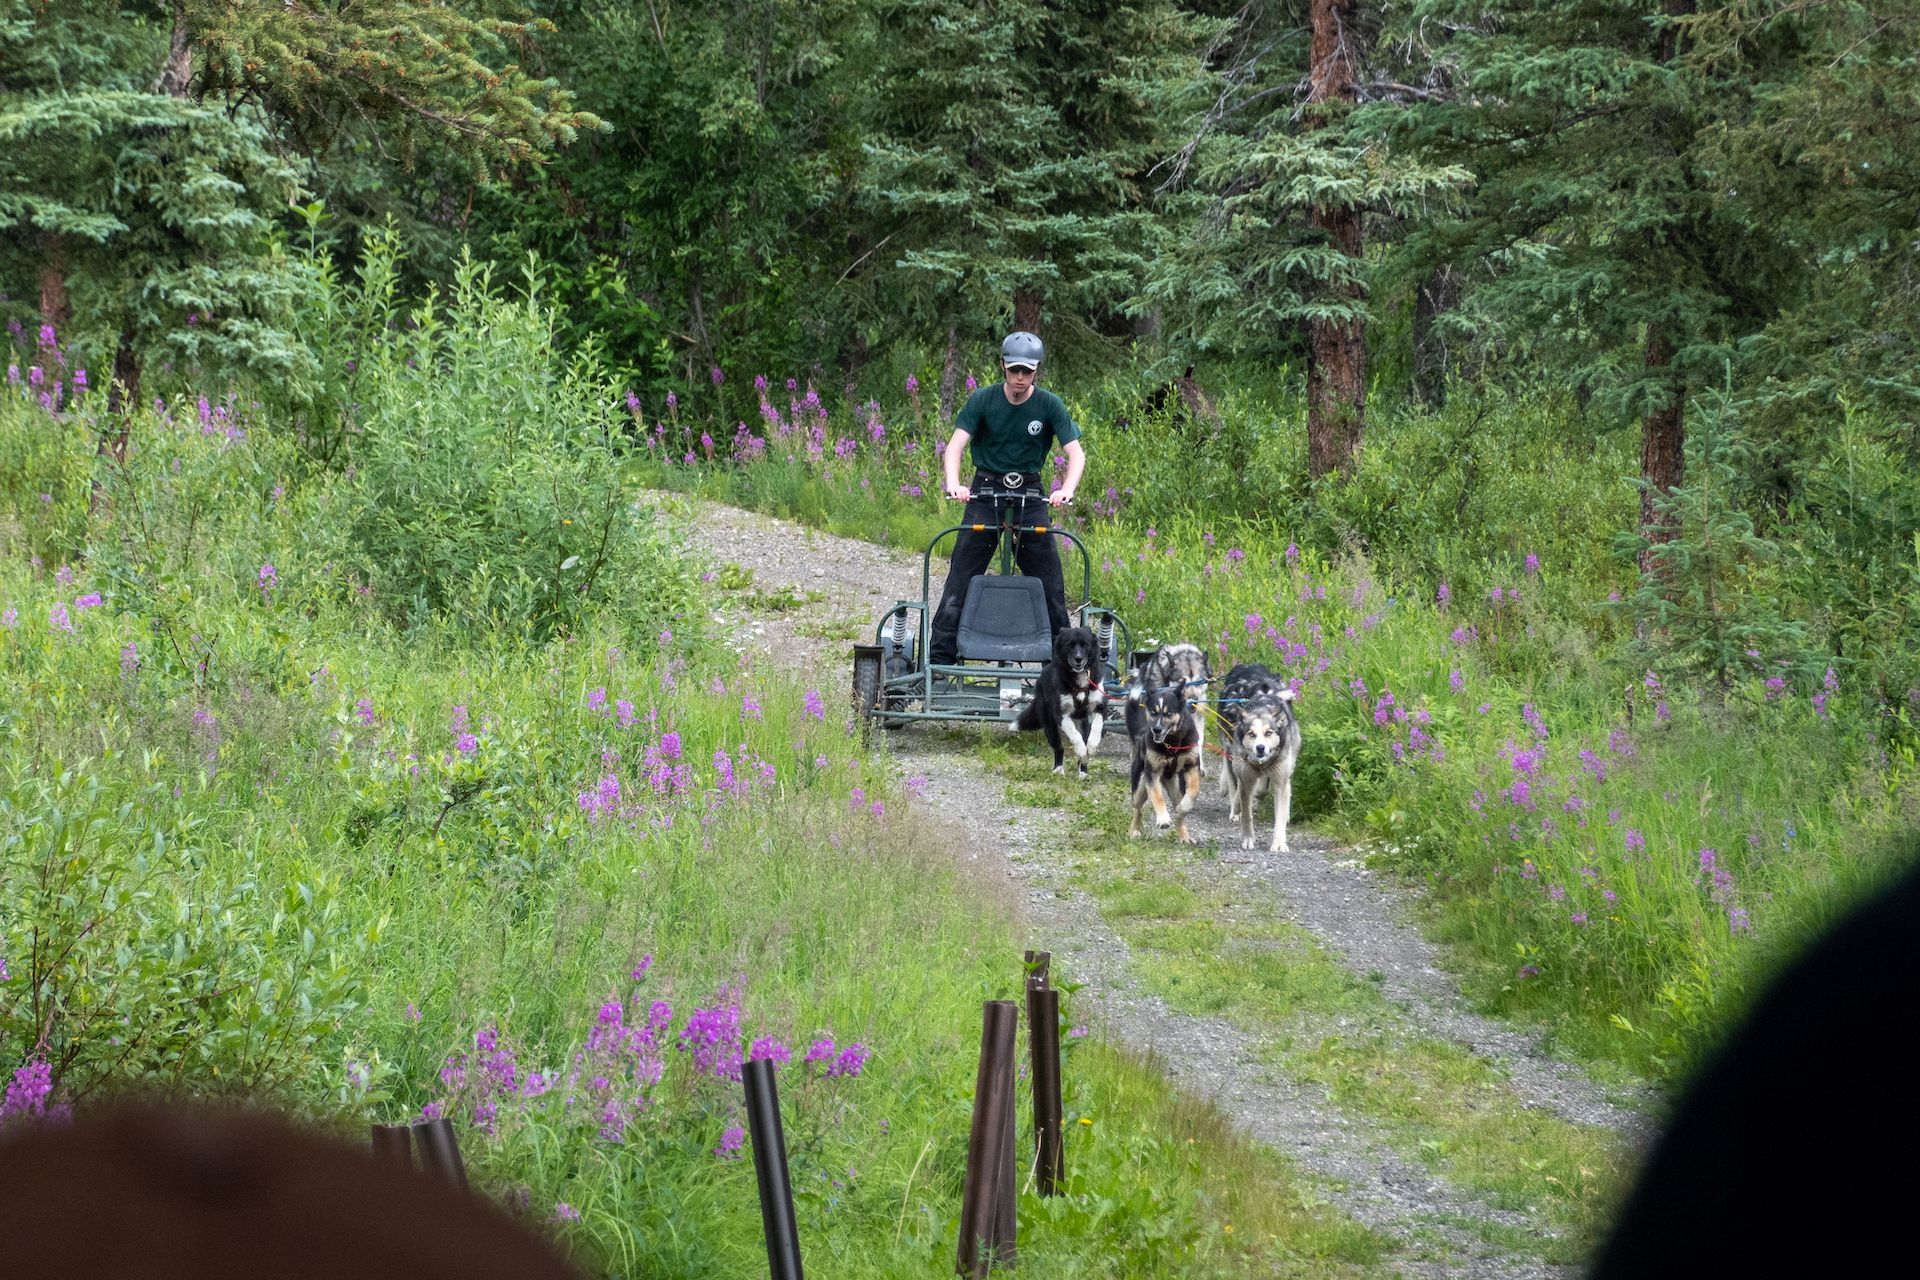 A park ranger mushered a small team of sled dogs as part of the demonstration.